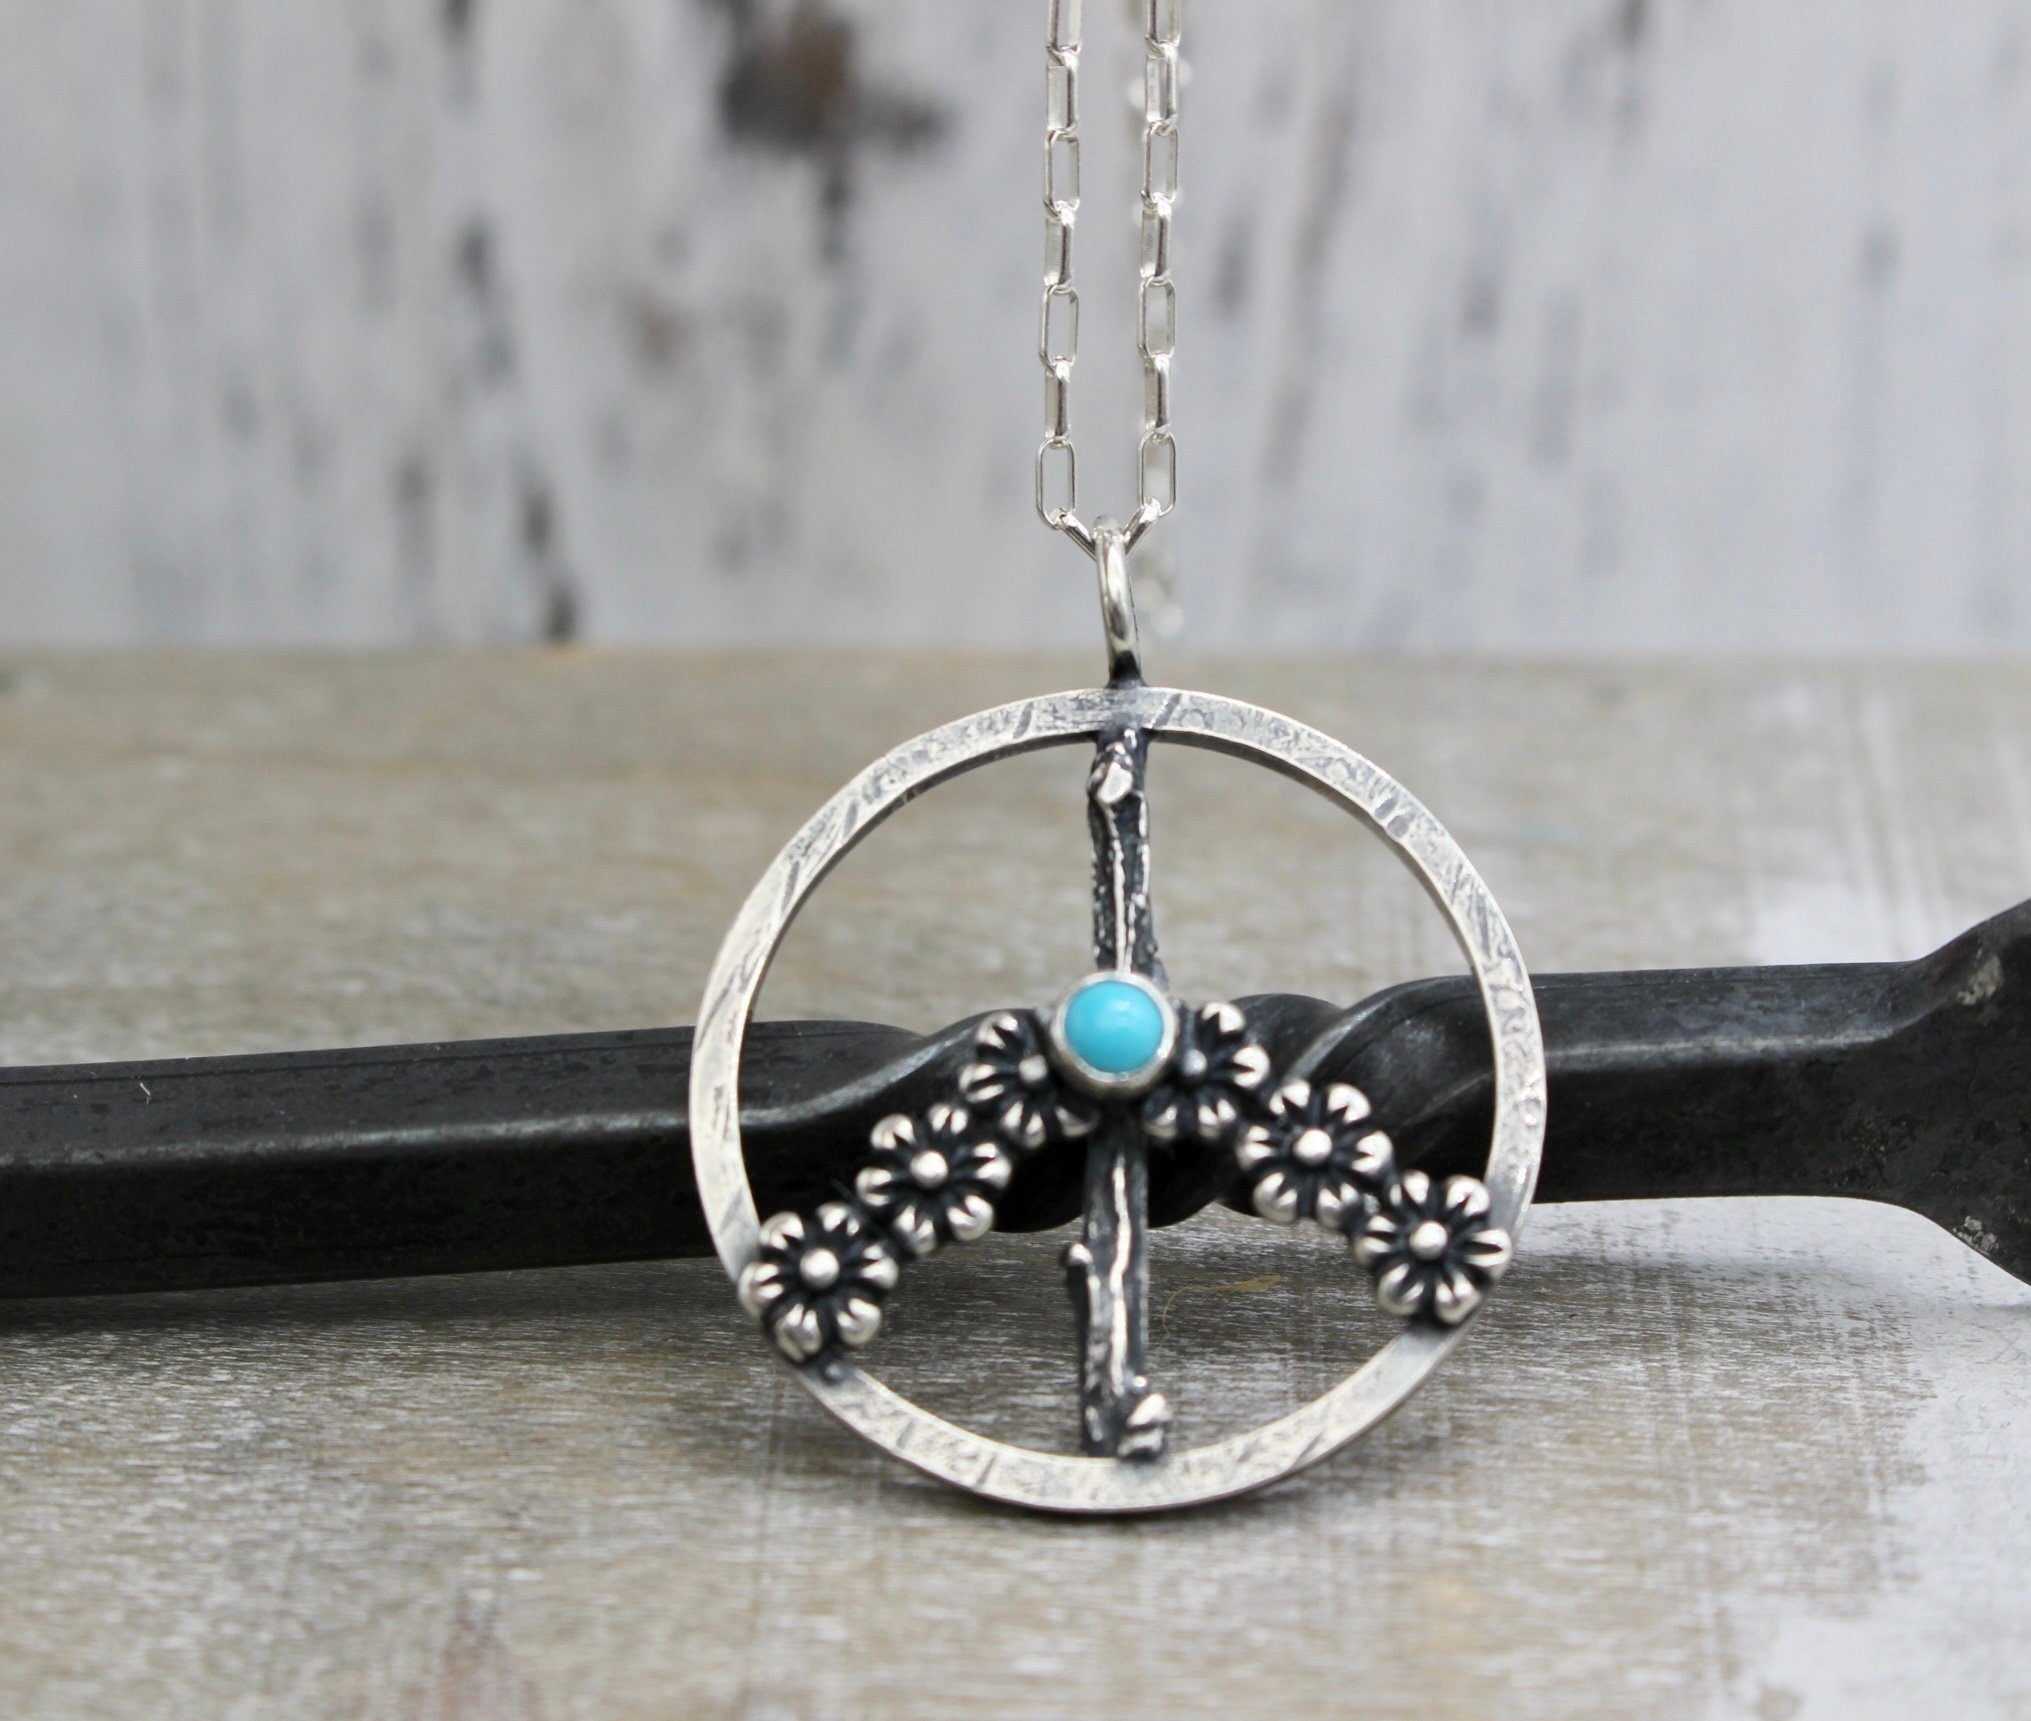 Turquoise necklace / peace sign necklace / charm necklace / gift for her / blue gemstone